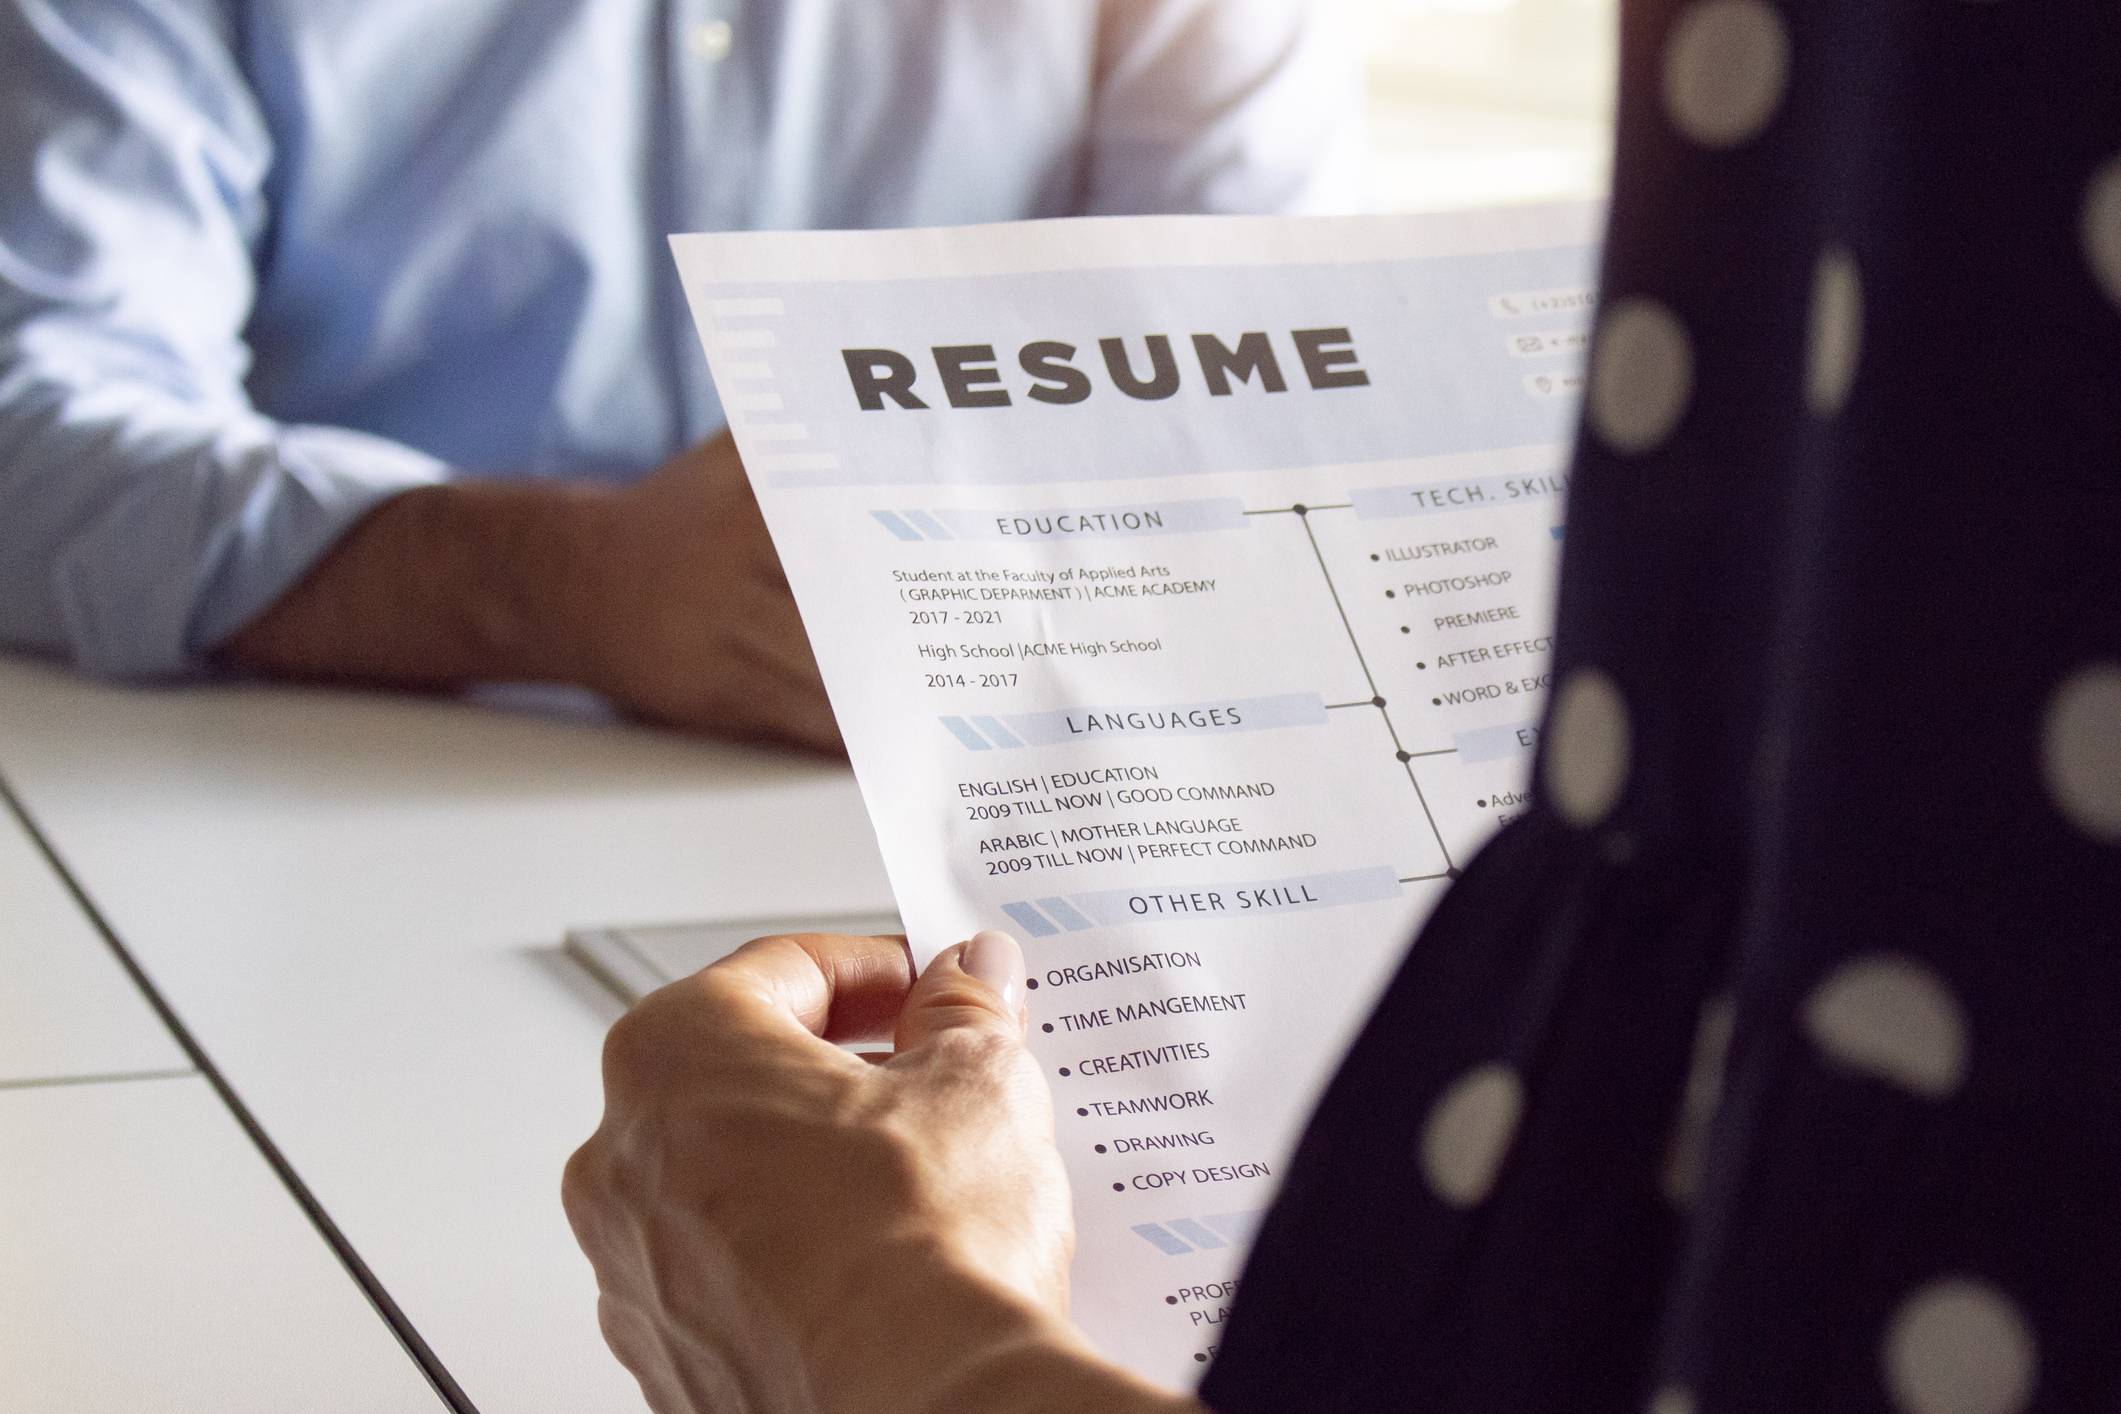 How to write a winning resume that gets you the job